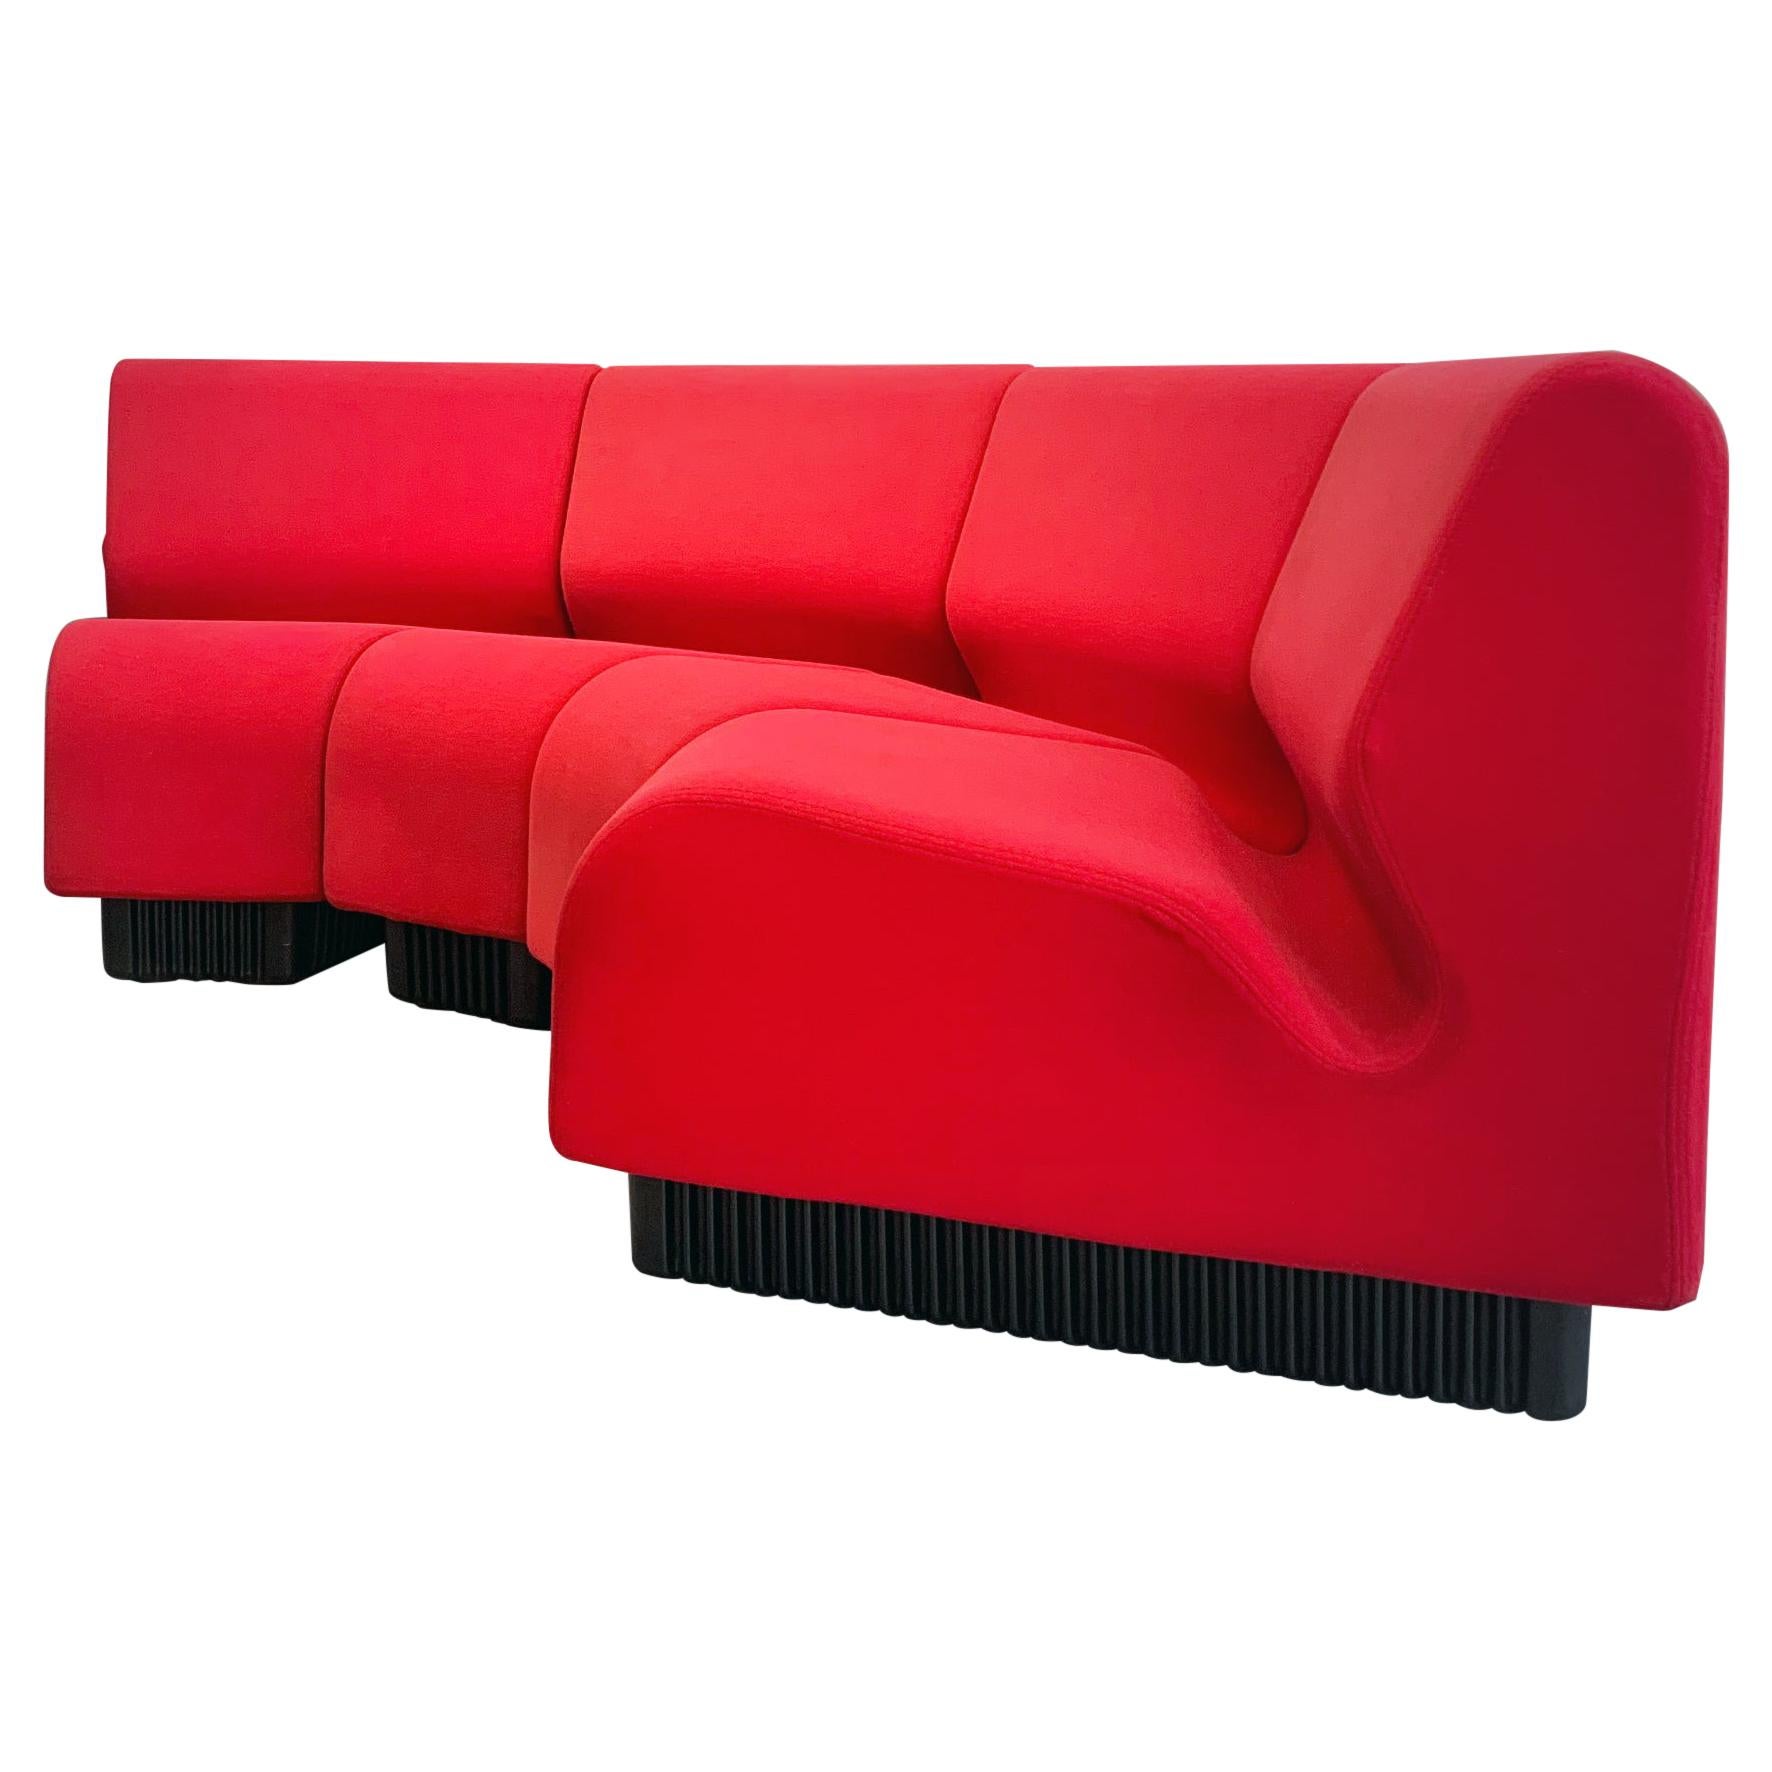 Bright Red Couch Online, 59% OFF | www.ingeniovirtual.com